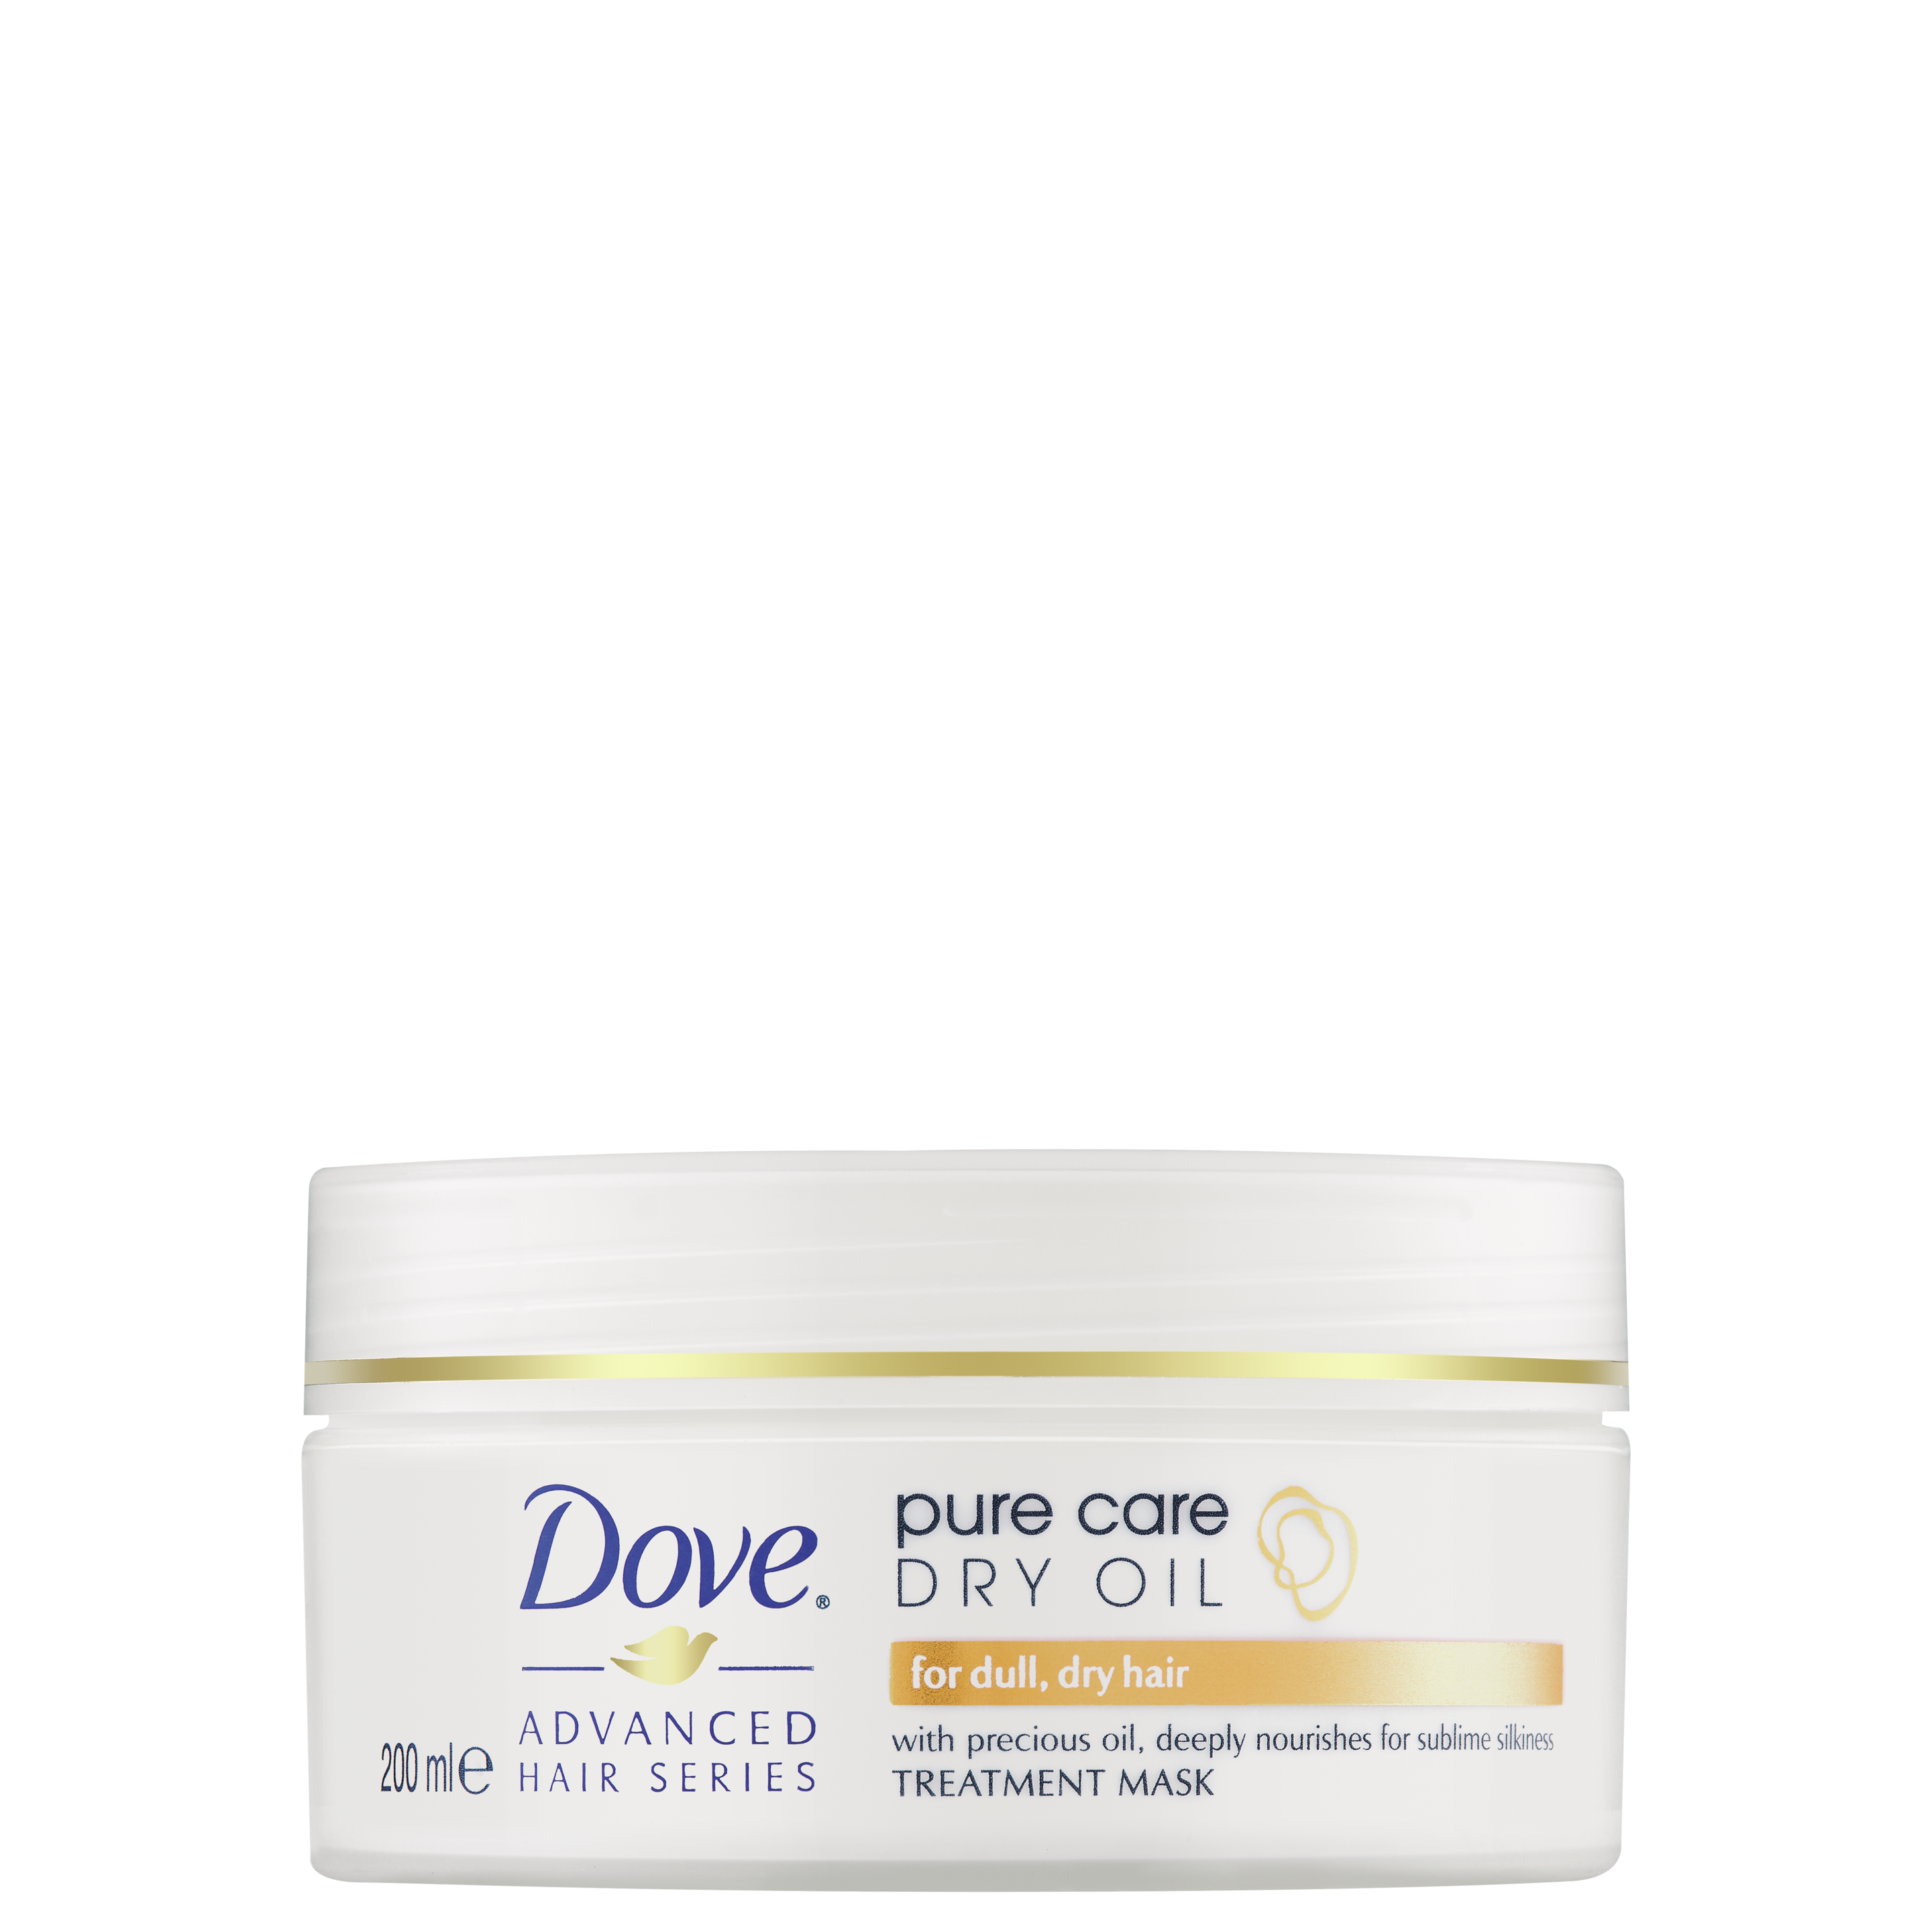 Dove Advanced Hair Series Pure Care Dry Oil Mask 200ml